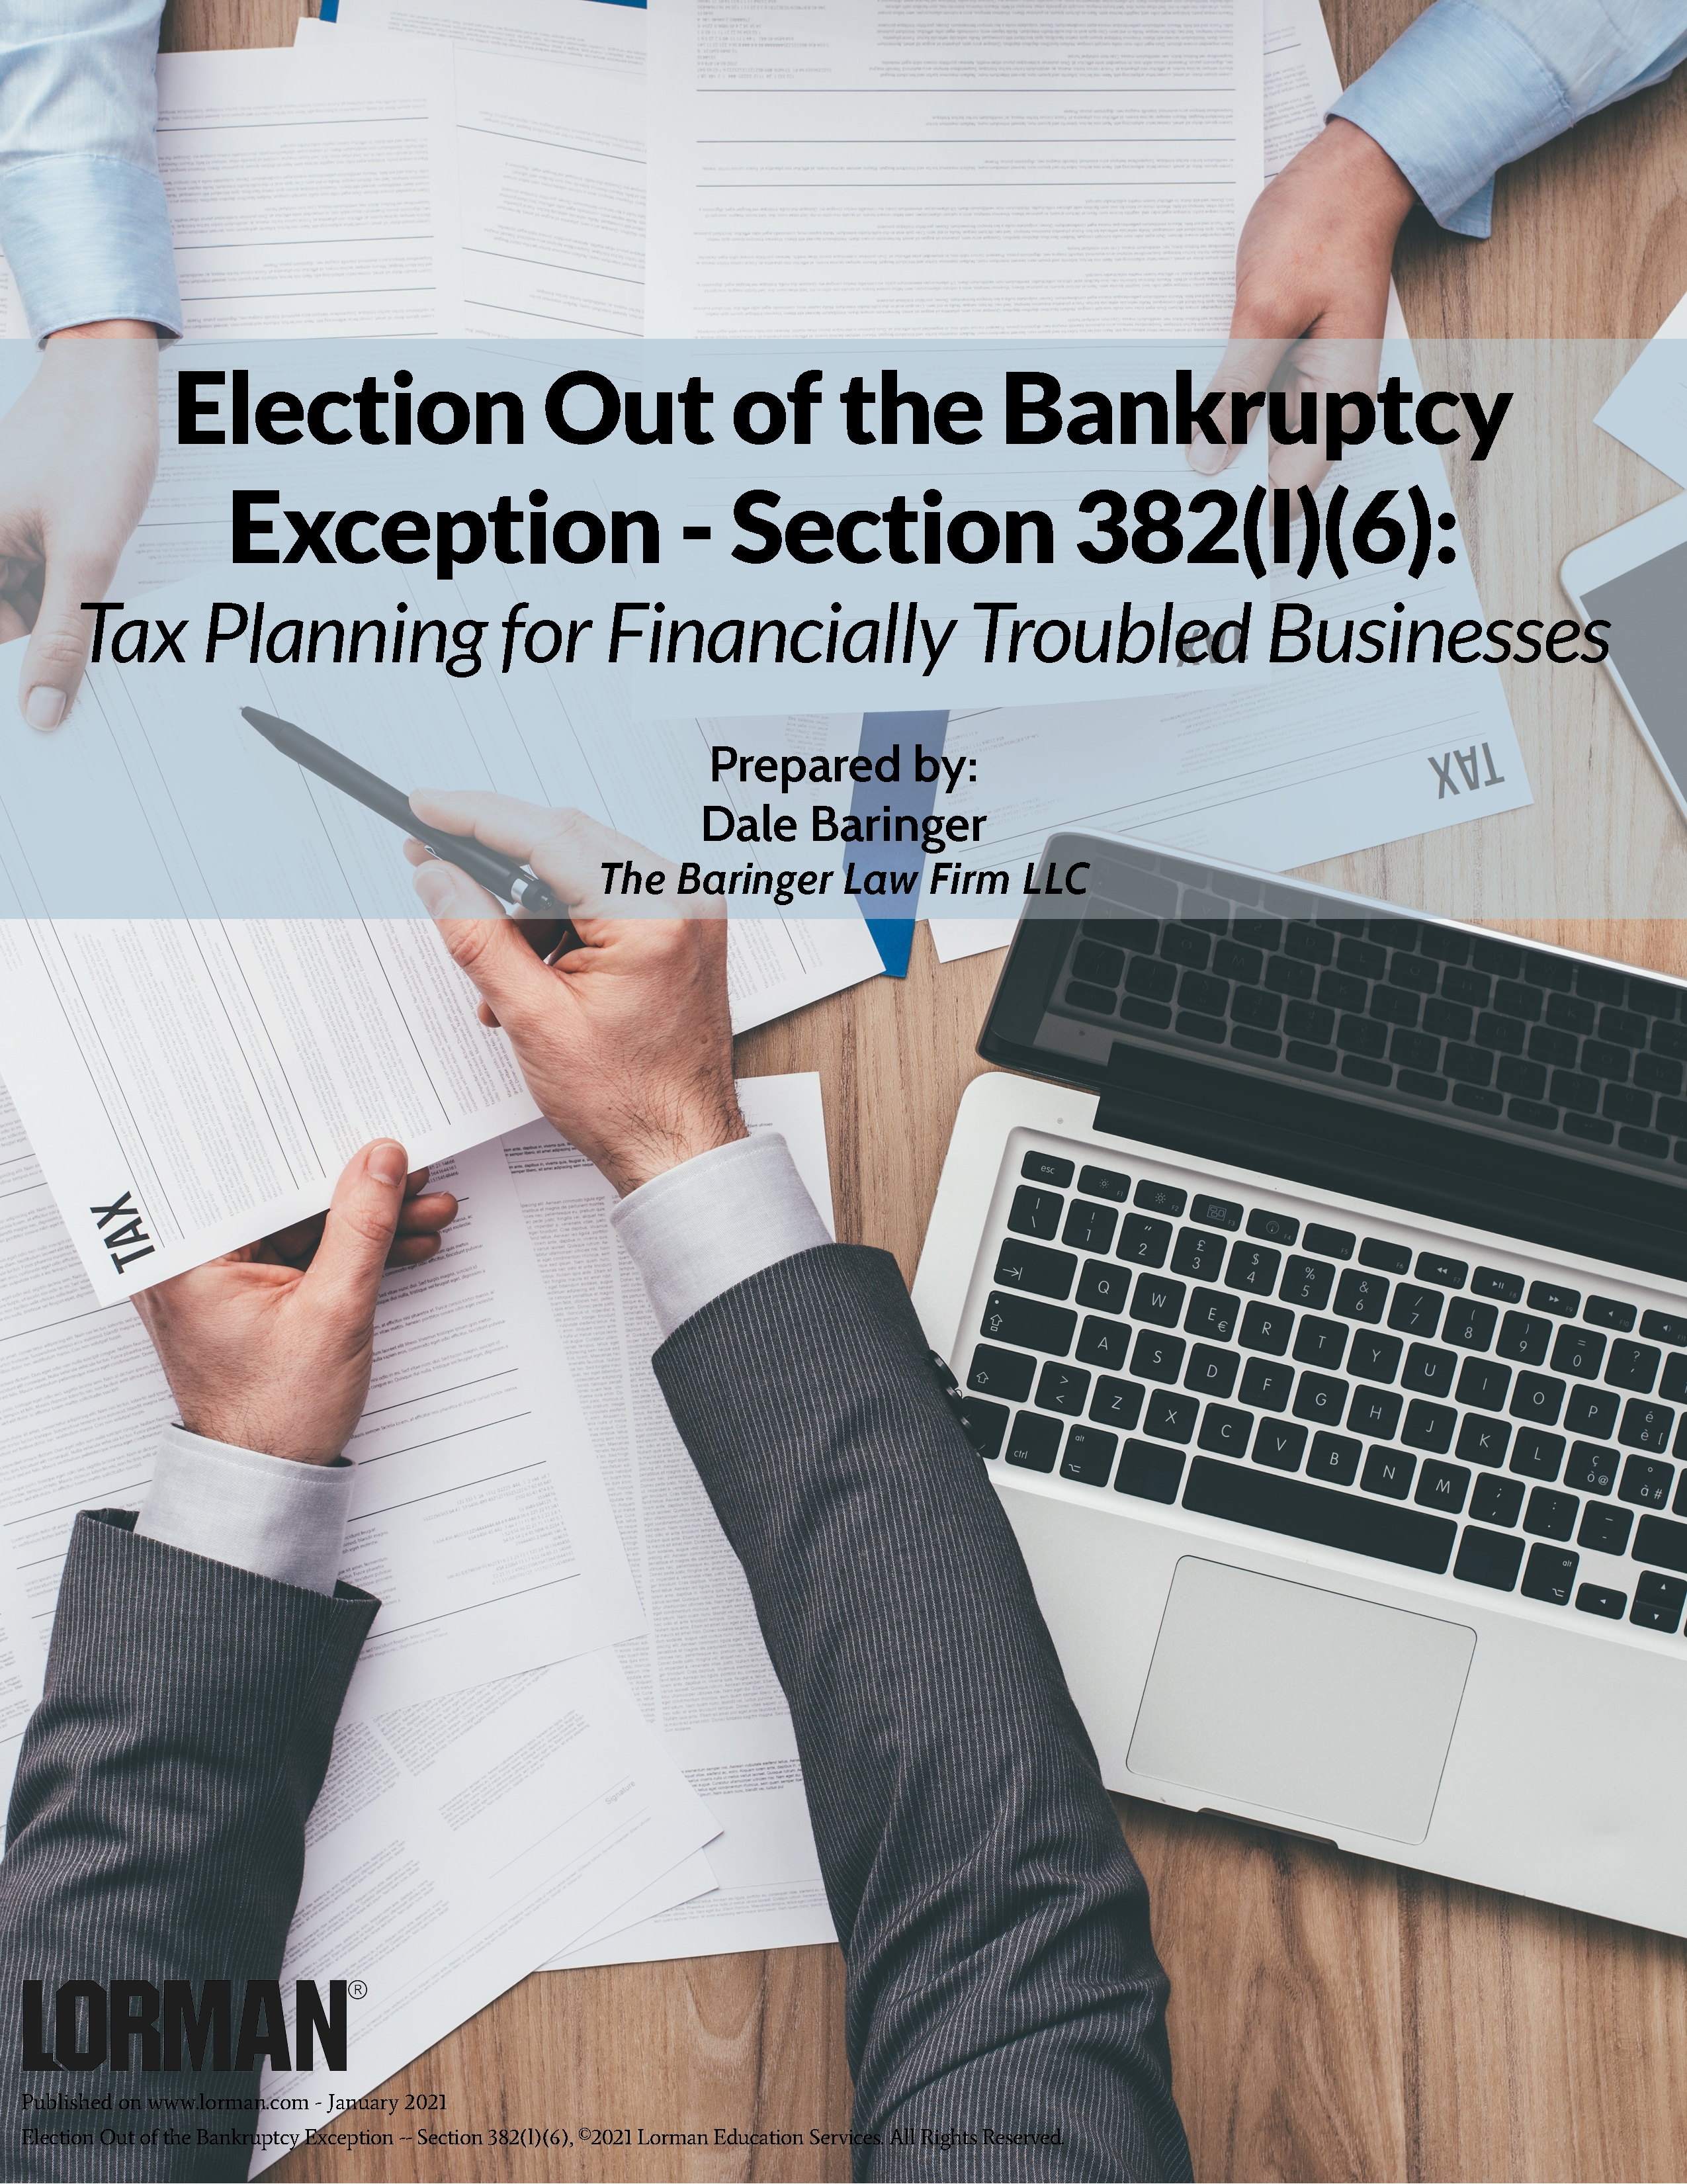 Election Out of the Bankruptcy Exception - Section 382(l)(6)